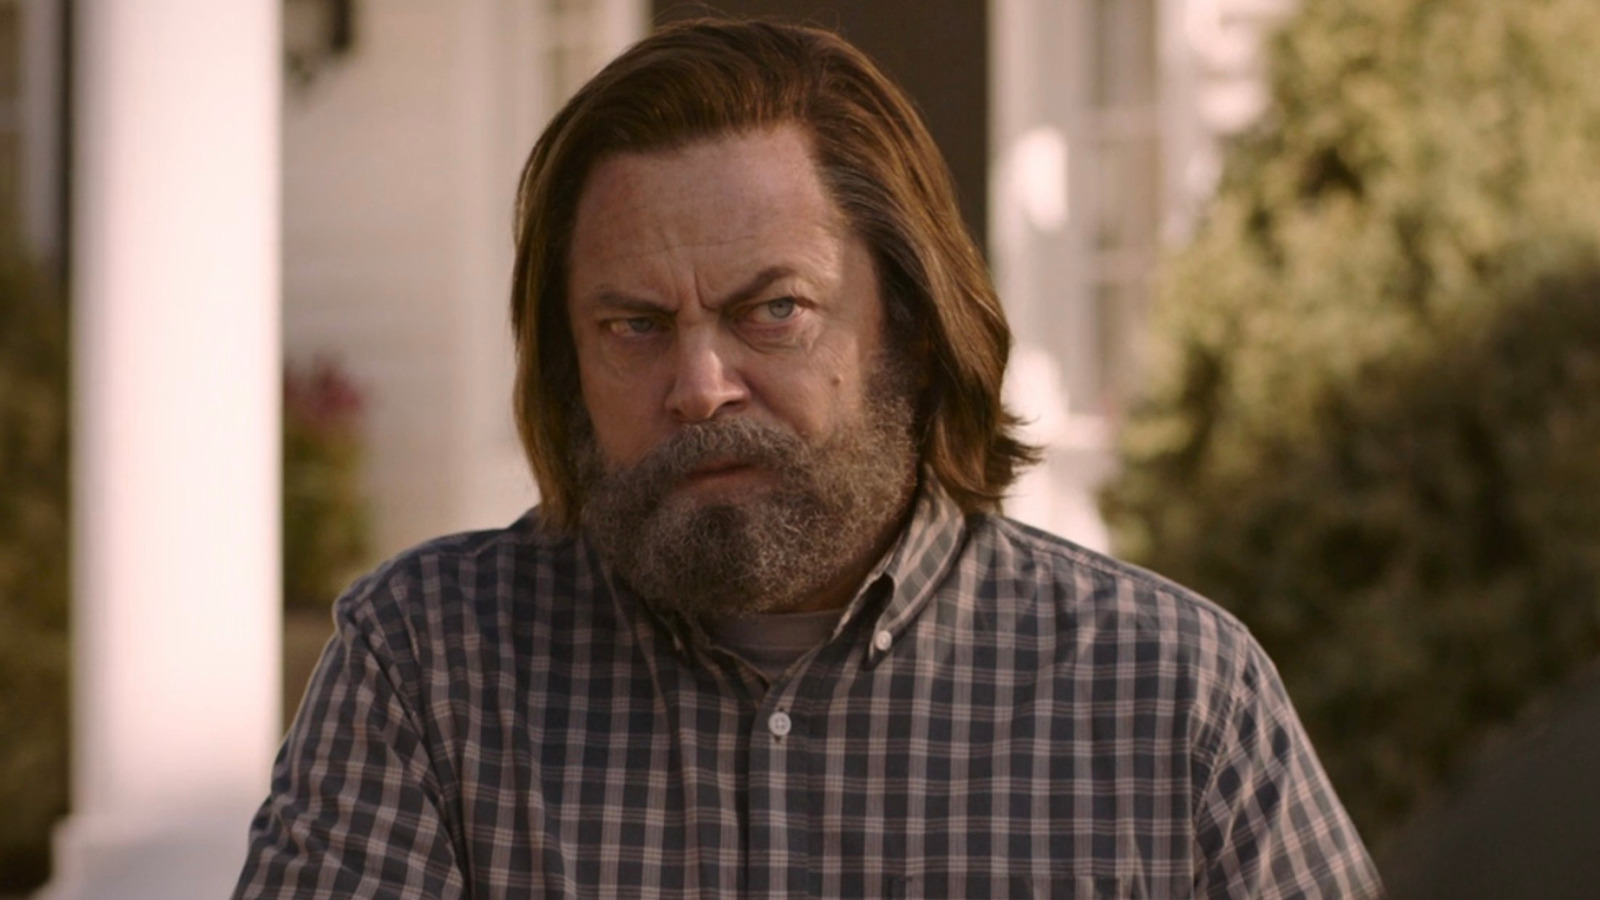 Nick Offerman responds to haters after The Last of Us gets review-bombed on  IMDB